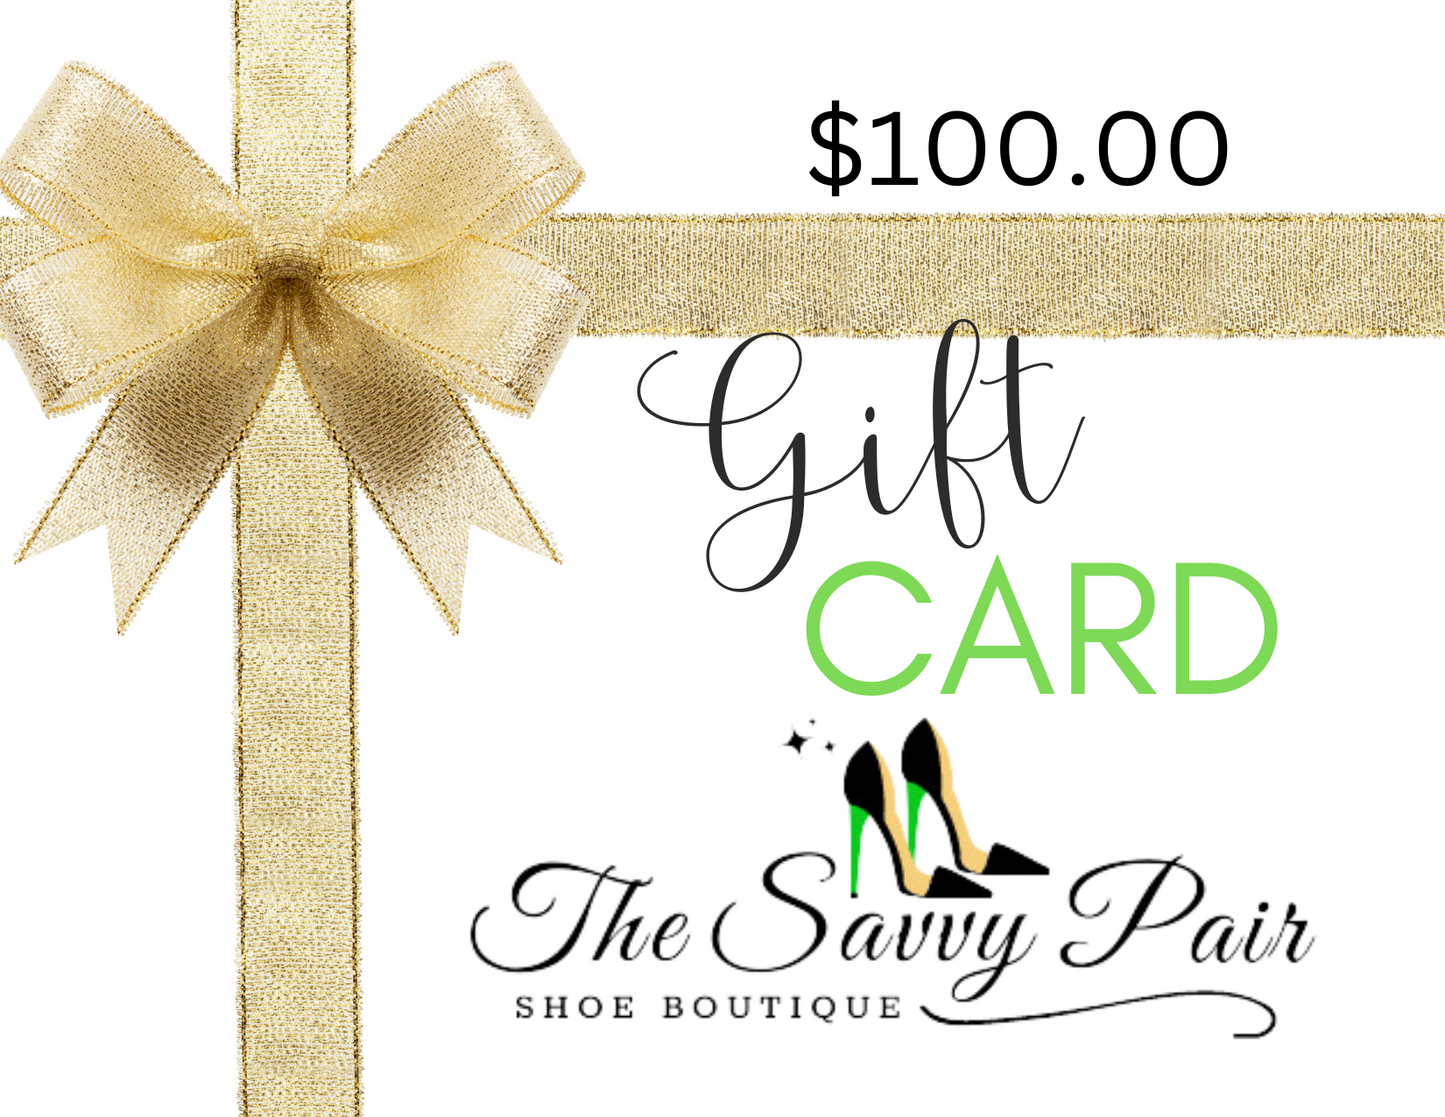 The Savvy Pair Shoe Boutique Gift Card